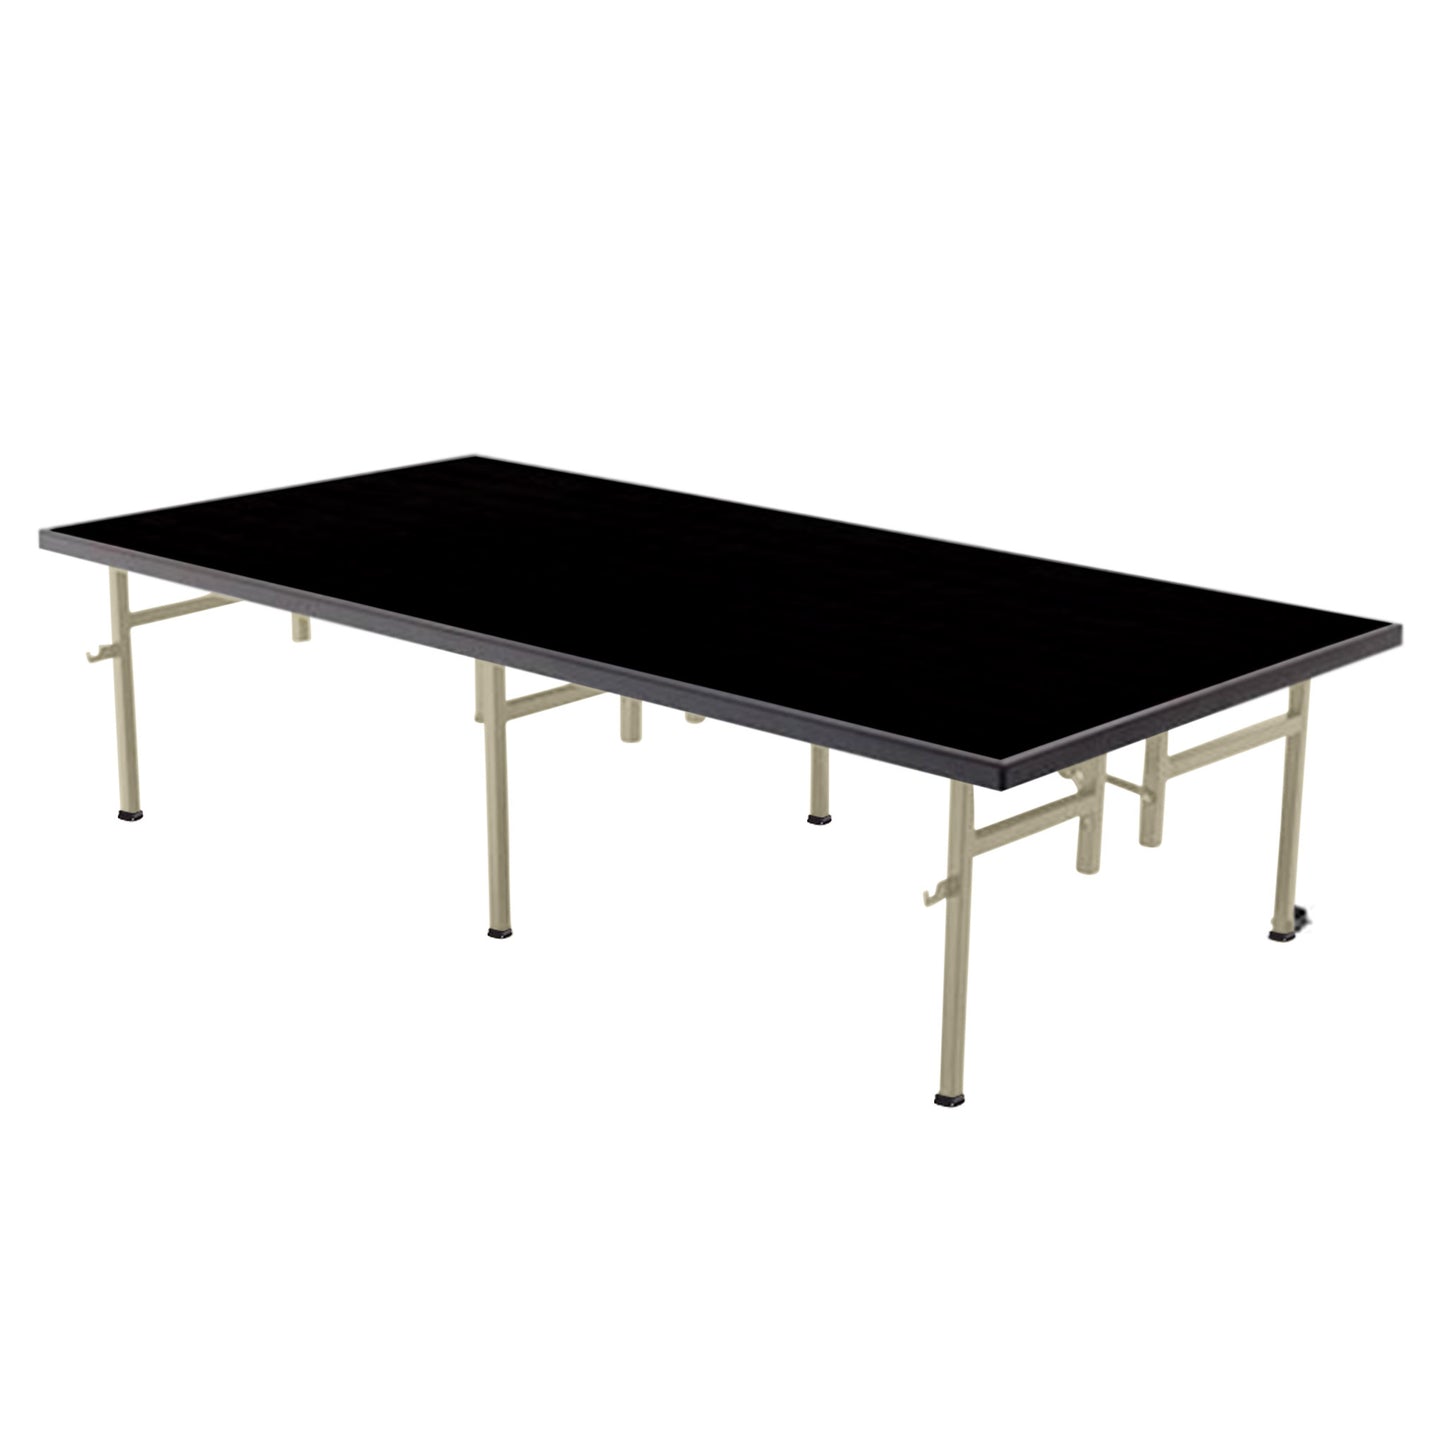 AmTab Fixed Height Stage - Polypropylene Top - 36"W x 48"L x 8"H  (AmTab AMT-ST3408P)